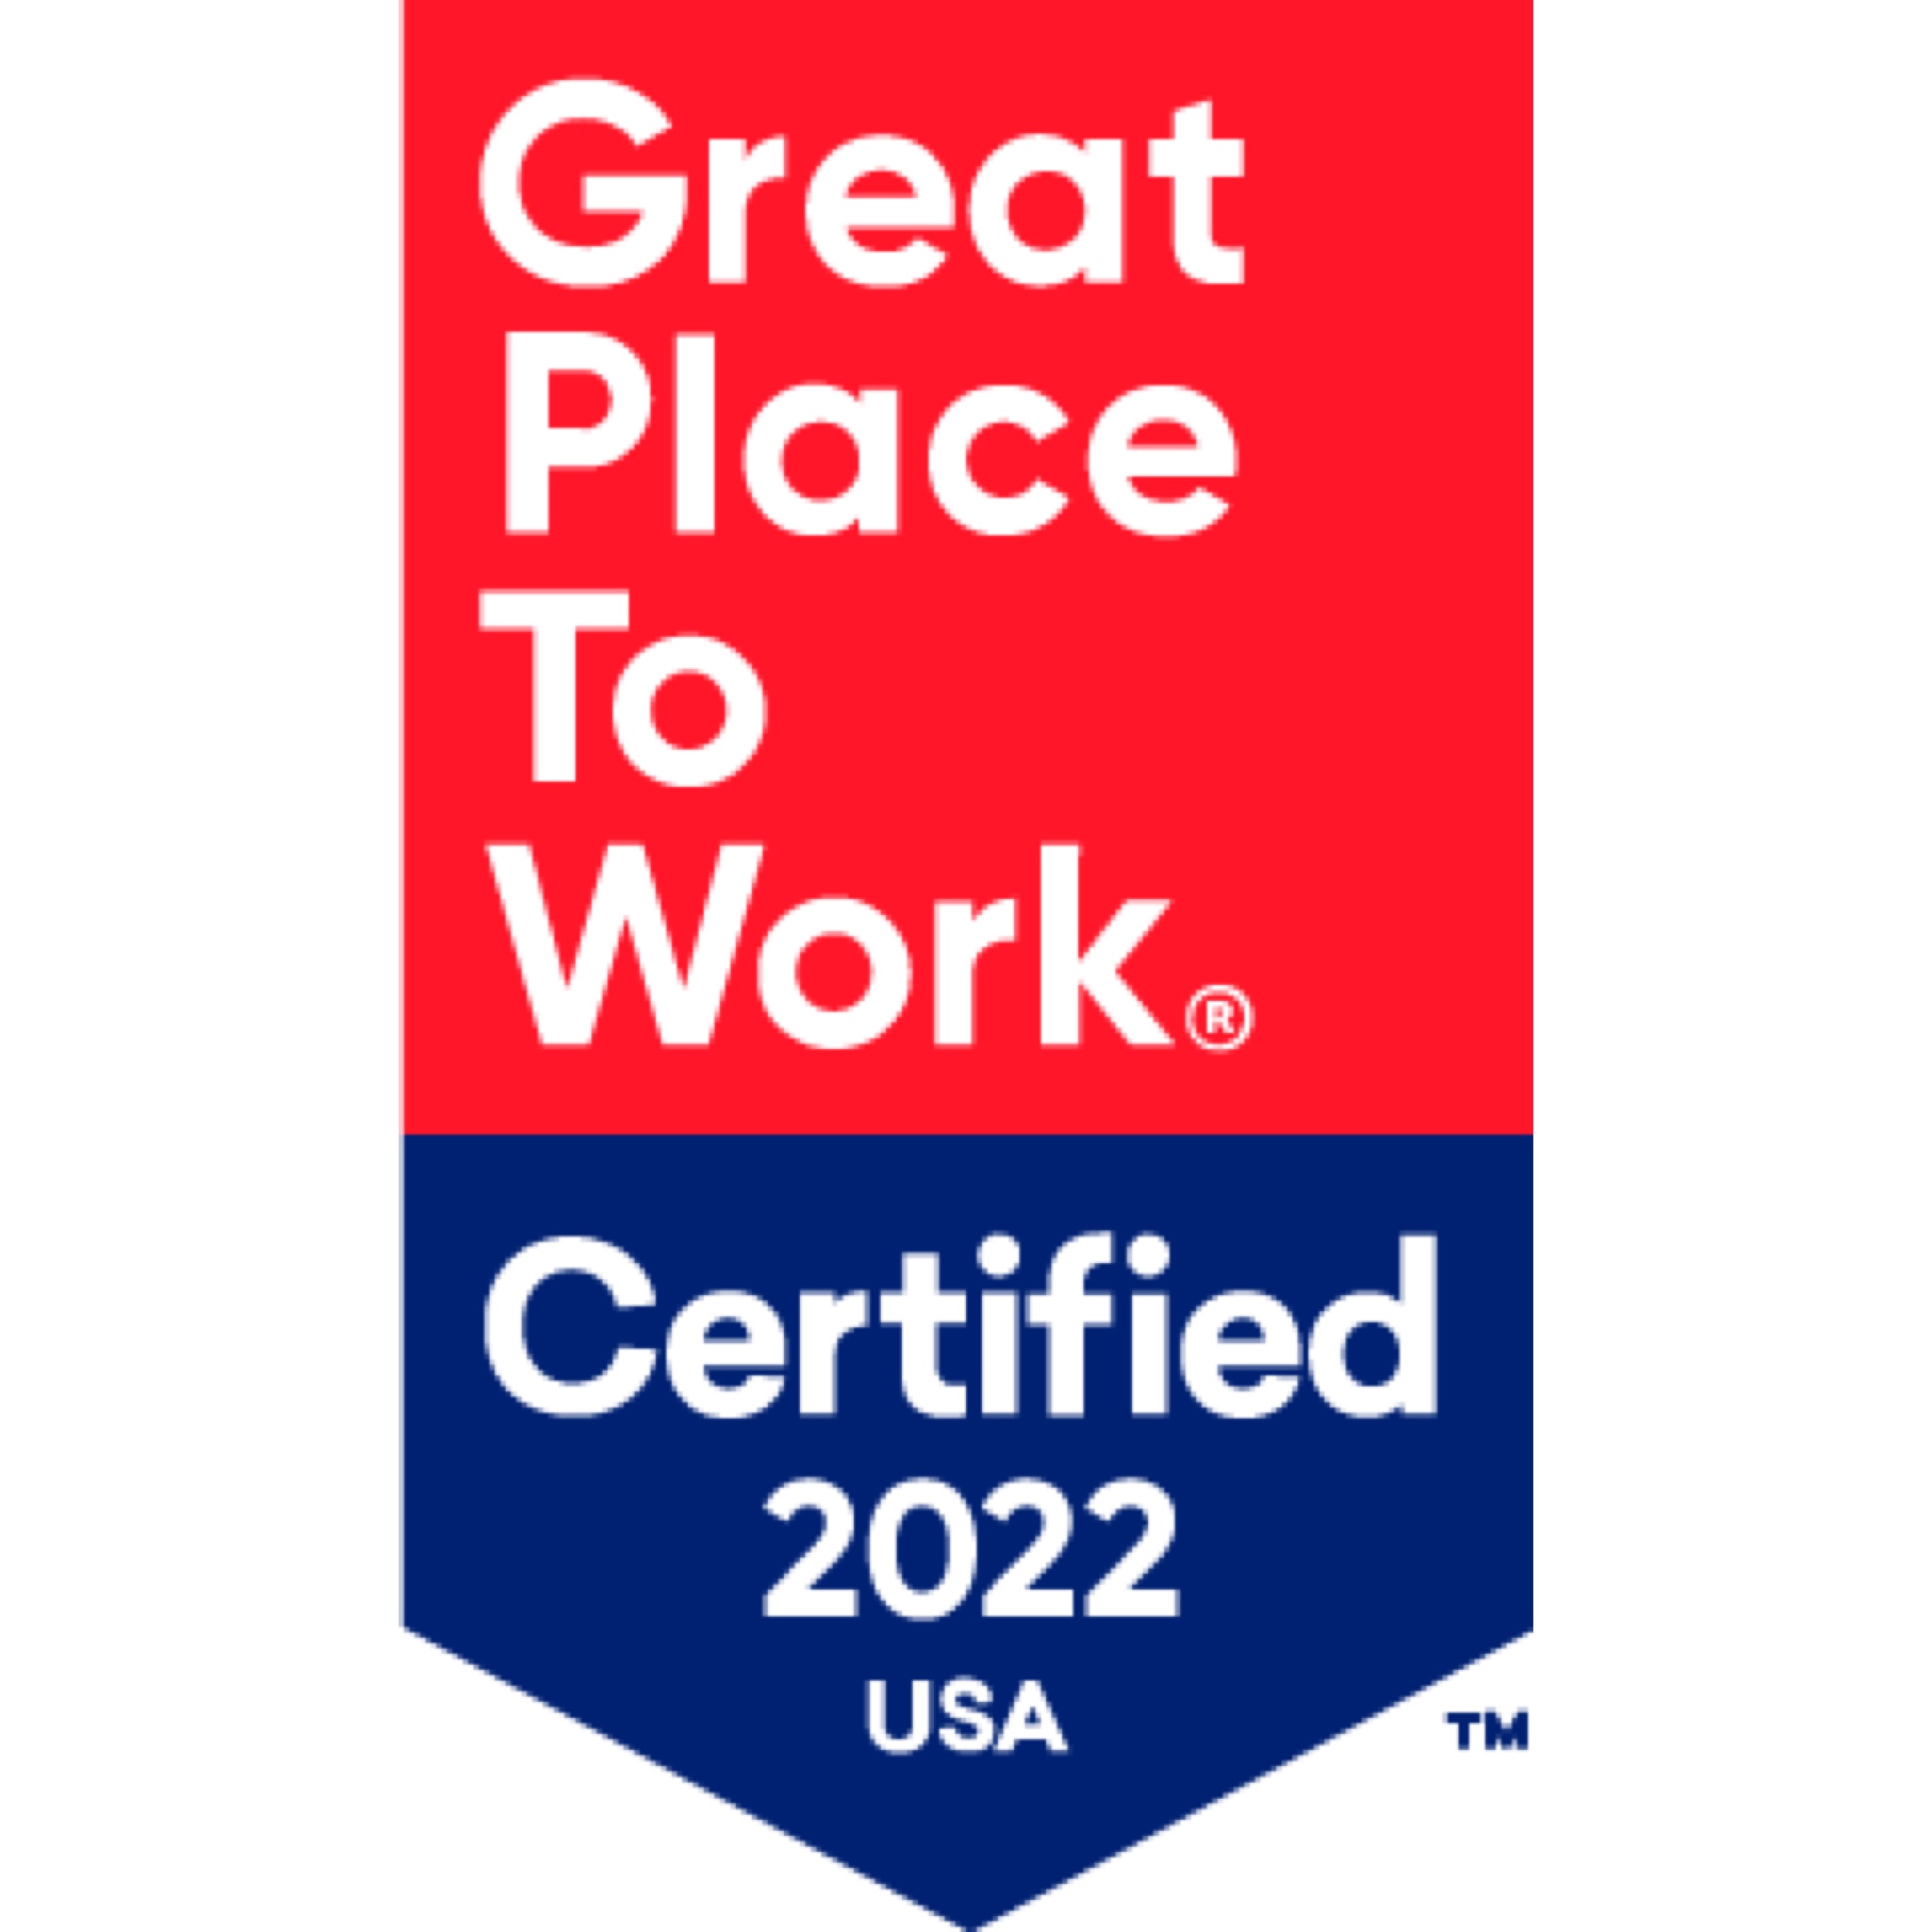 United States 营销公司 Altered State Productions 获得了 Great Places to Work - Certified 2022 USA 奖项